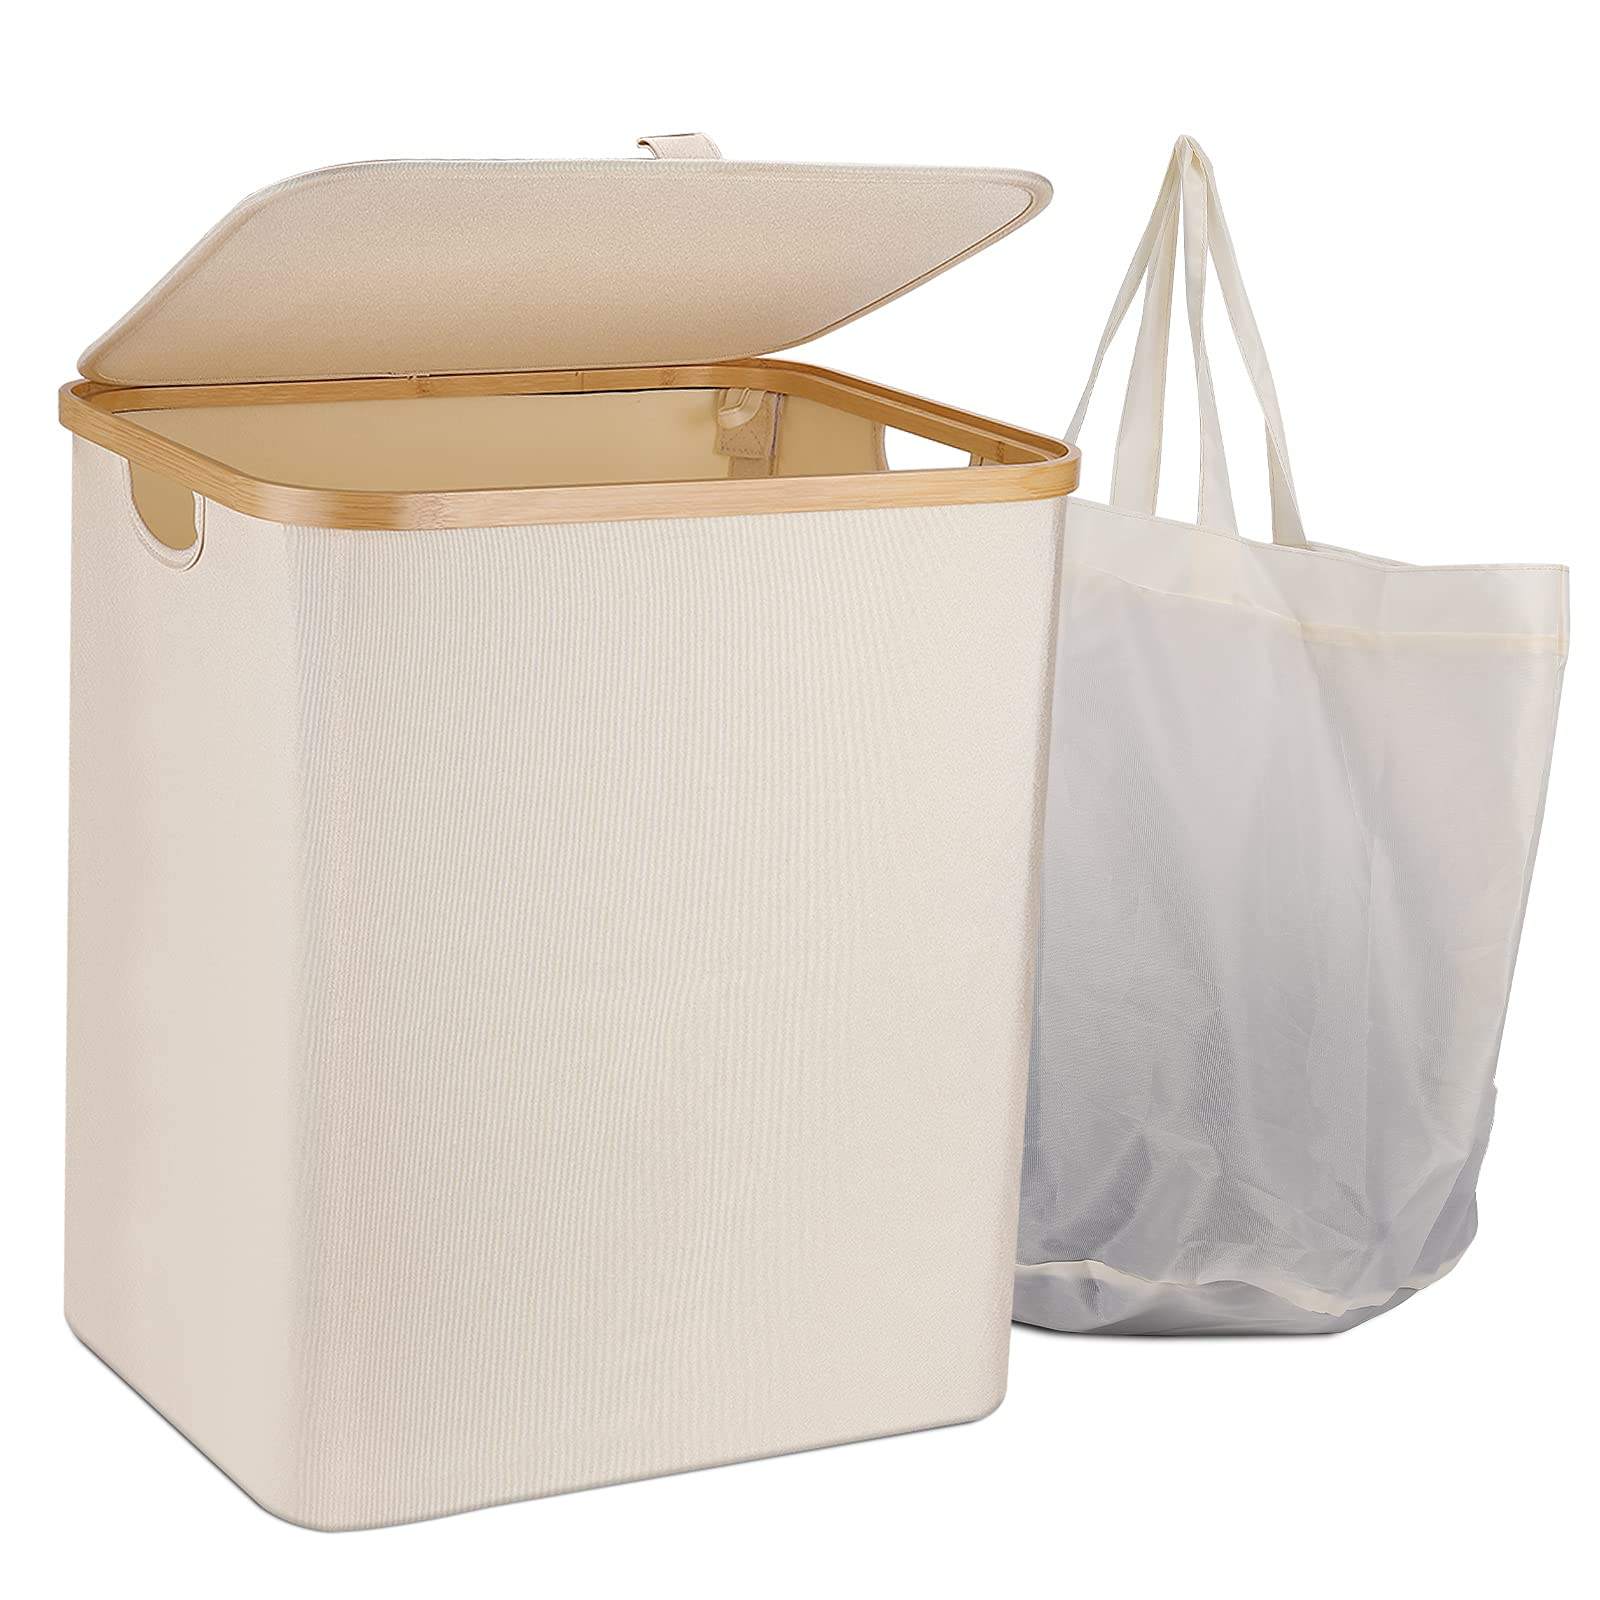 60L Collapsible Large Bamboo Laundry Hamper with Lid and Removable Laundry Bag, Waterproof Laundry Sorter Storage